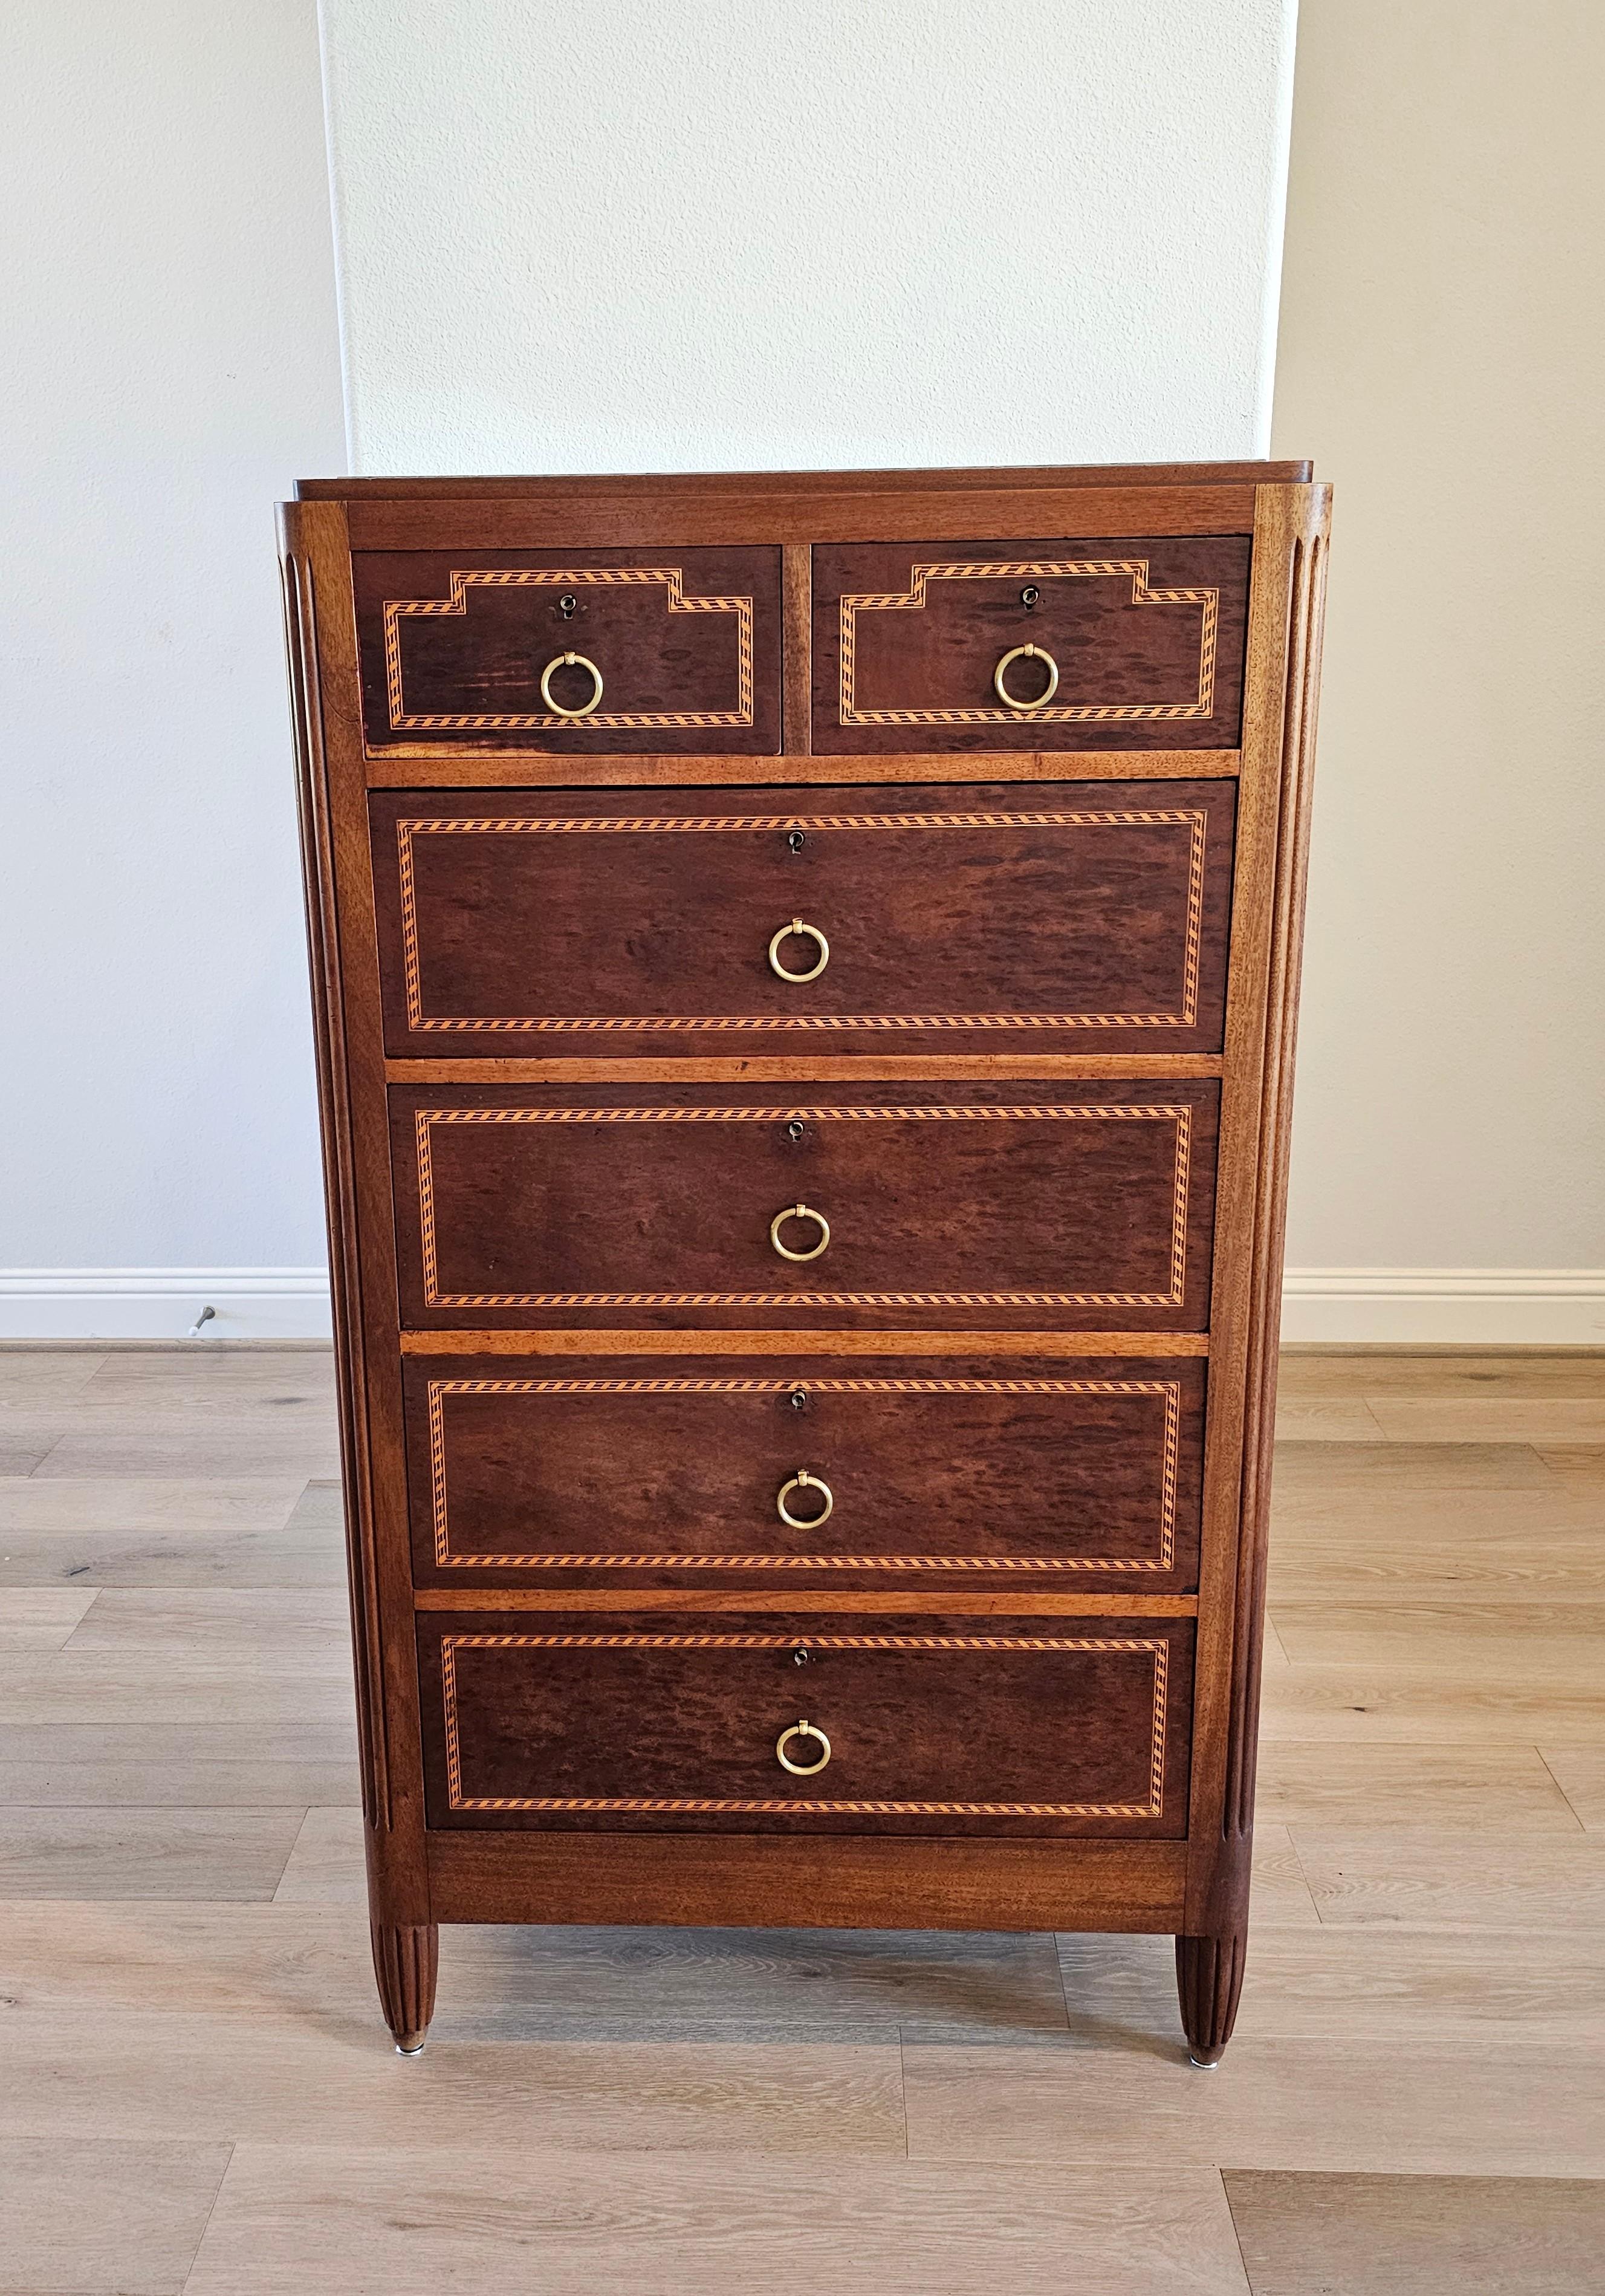 A spectacular scarce French Art Deco mahogany tall chest of drawers / semainier commode by important French ébéniste and designer Mercier & Chaleyssin.

Exquisitely handcrafted in France, circa early 1930s, exceptionally executed in luxurious Art